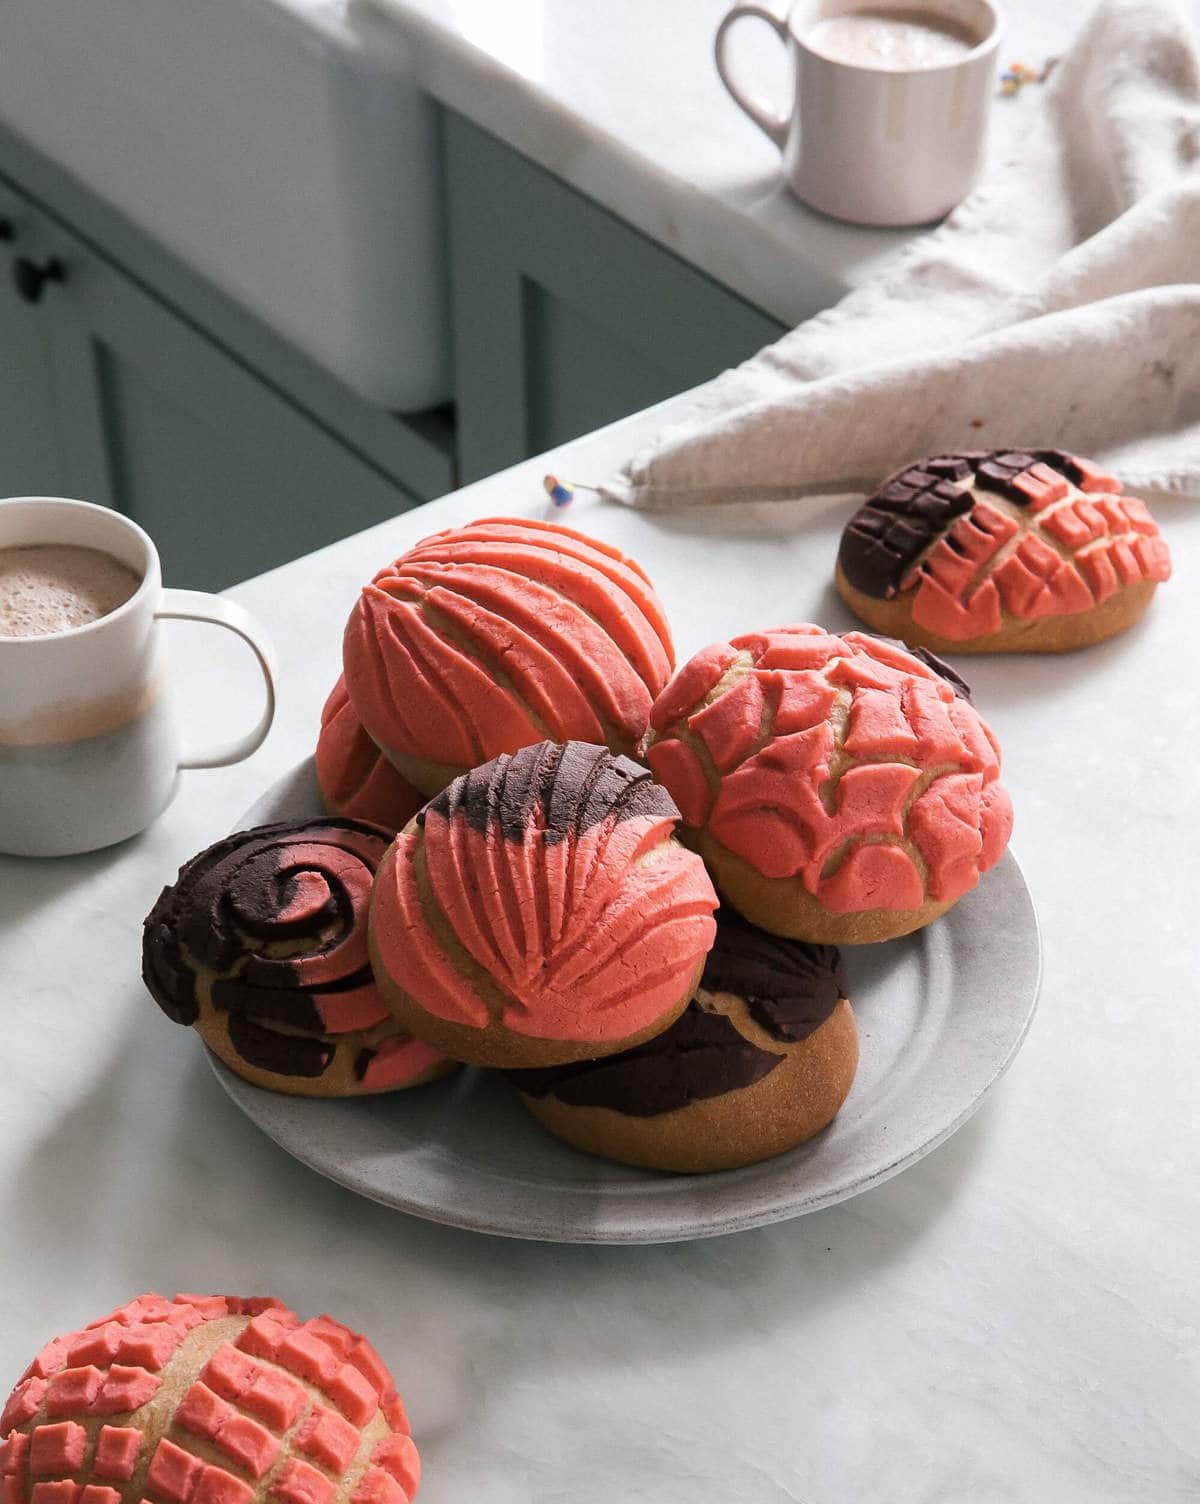 Conchas/Pan Dulce paired with hot chocolate